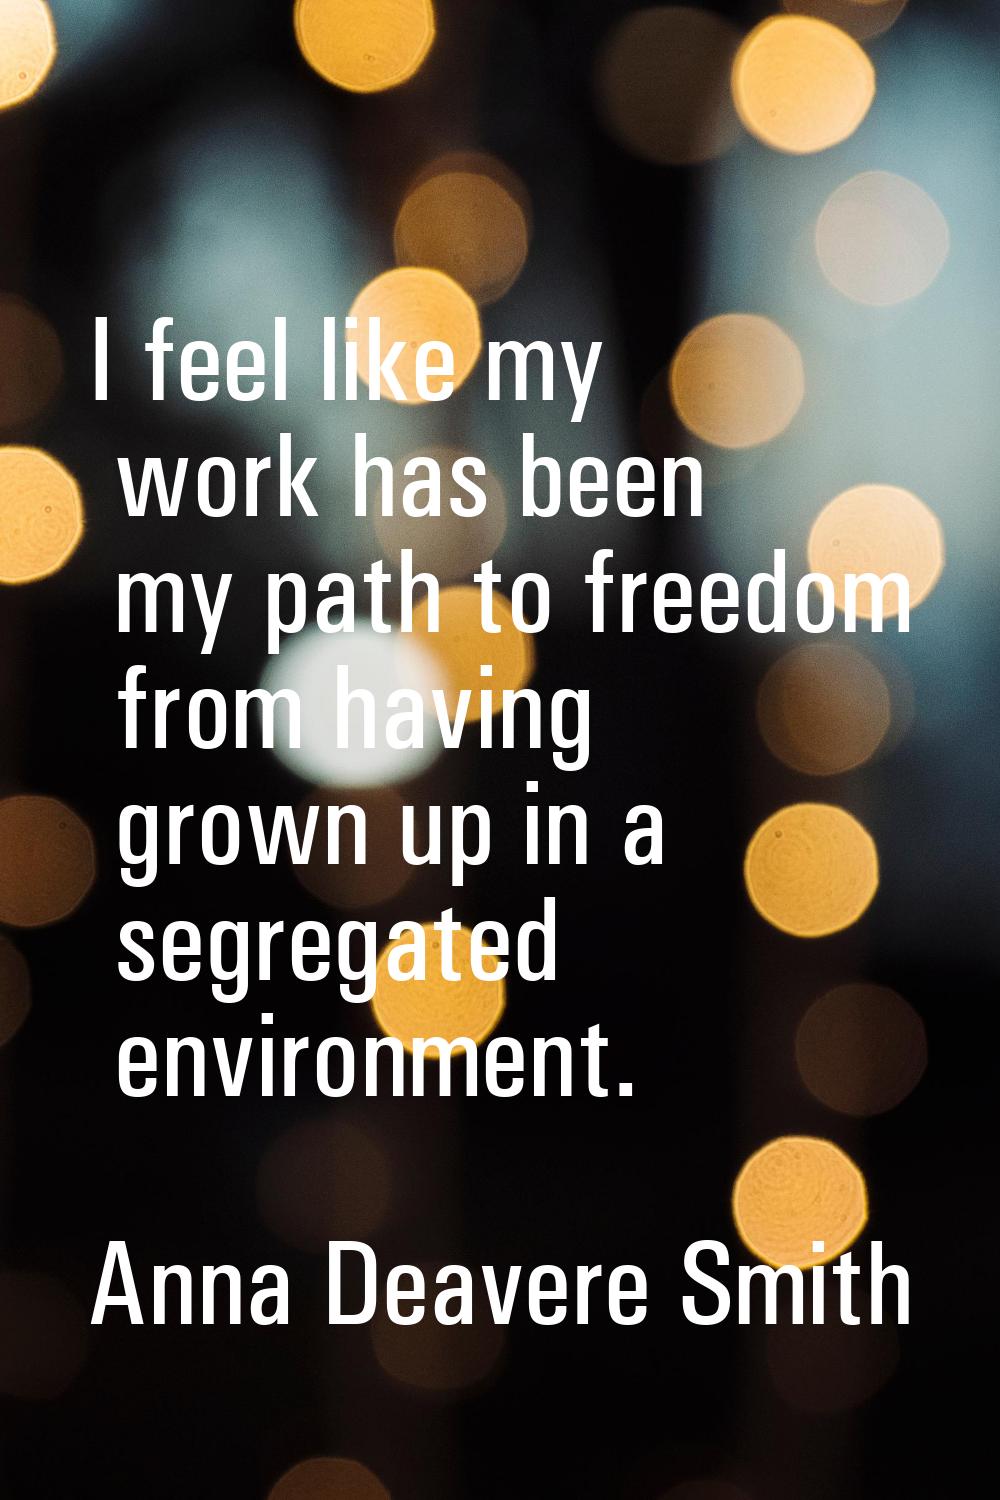 I feel like my work has been my path to freedom from having grown up in a segregated environment.